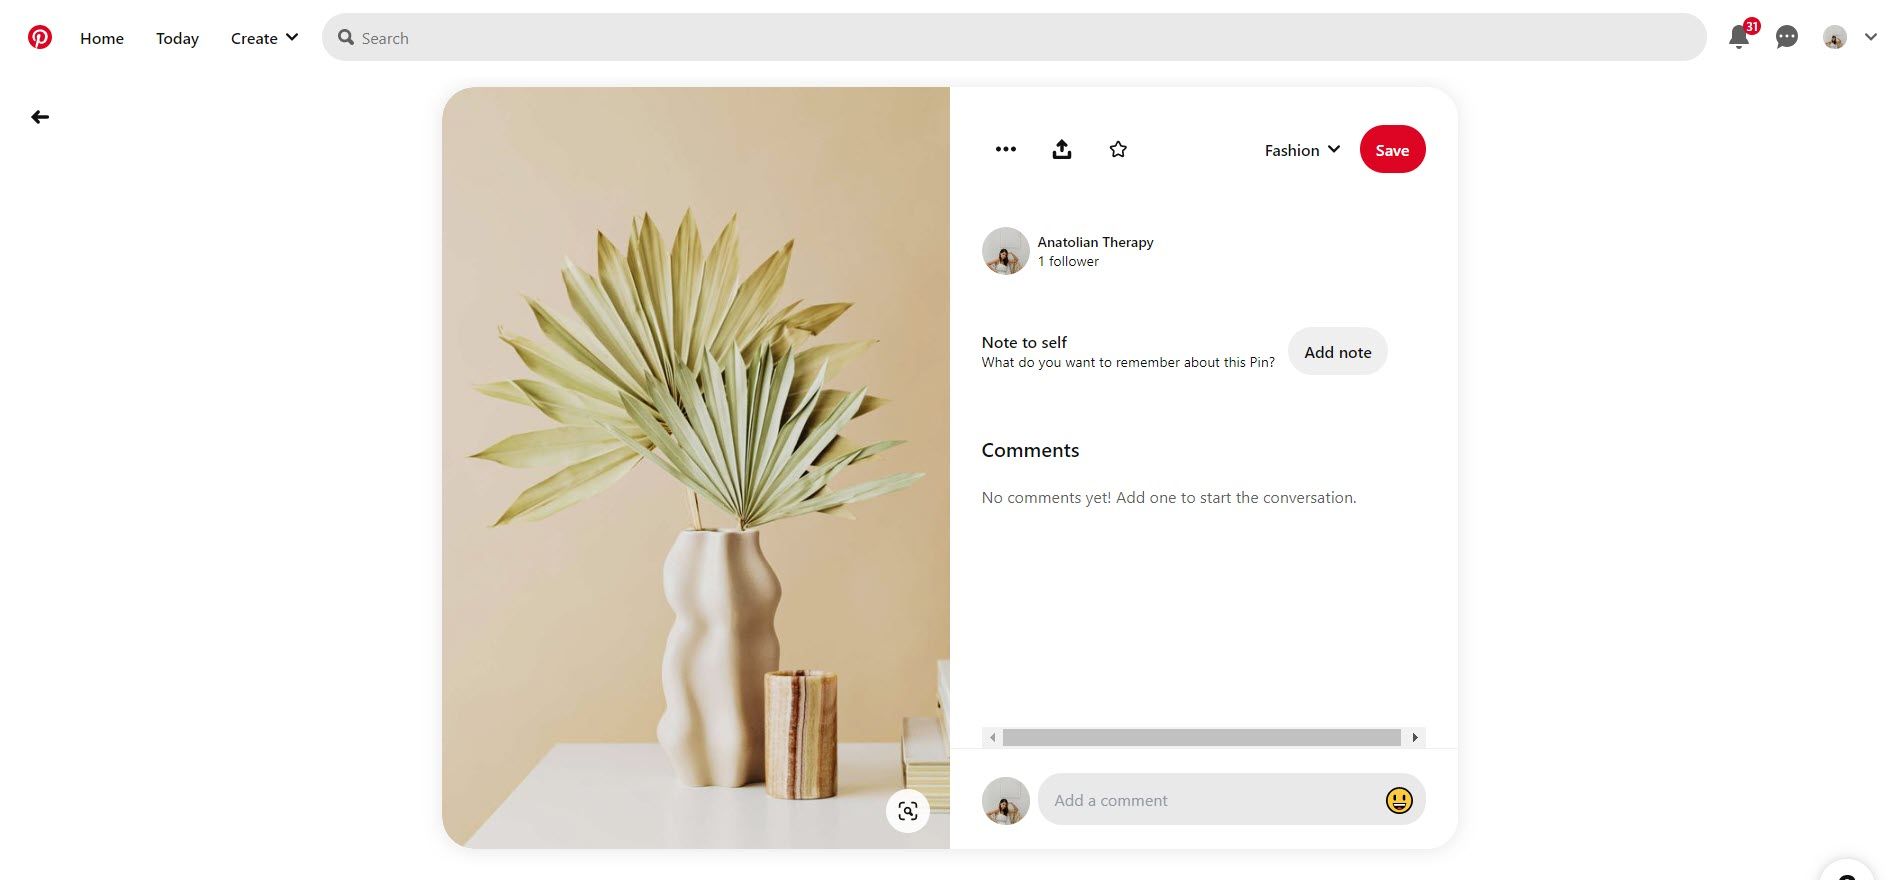 You can sell physical products on Pinterest without a website!